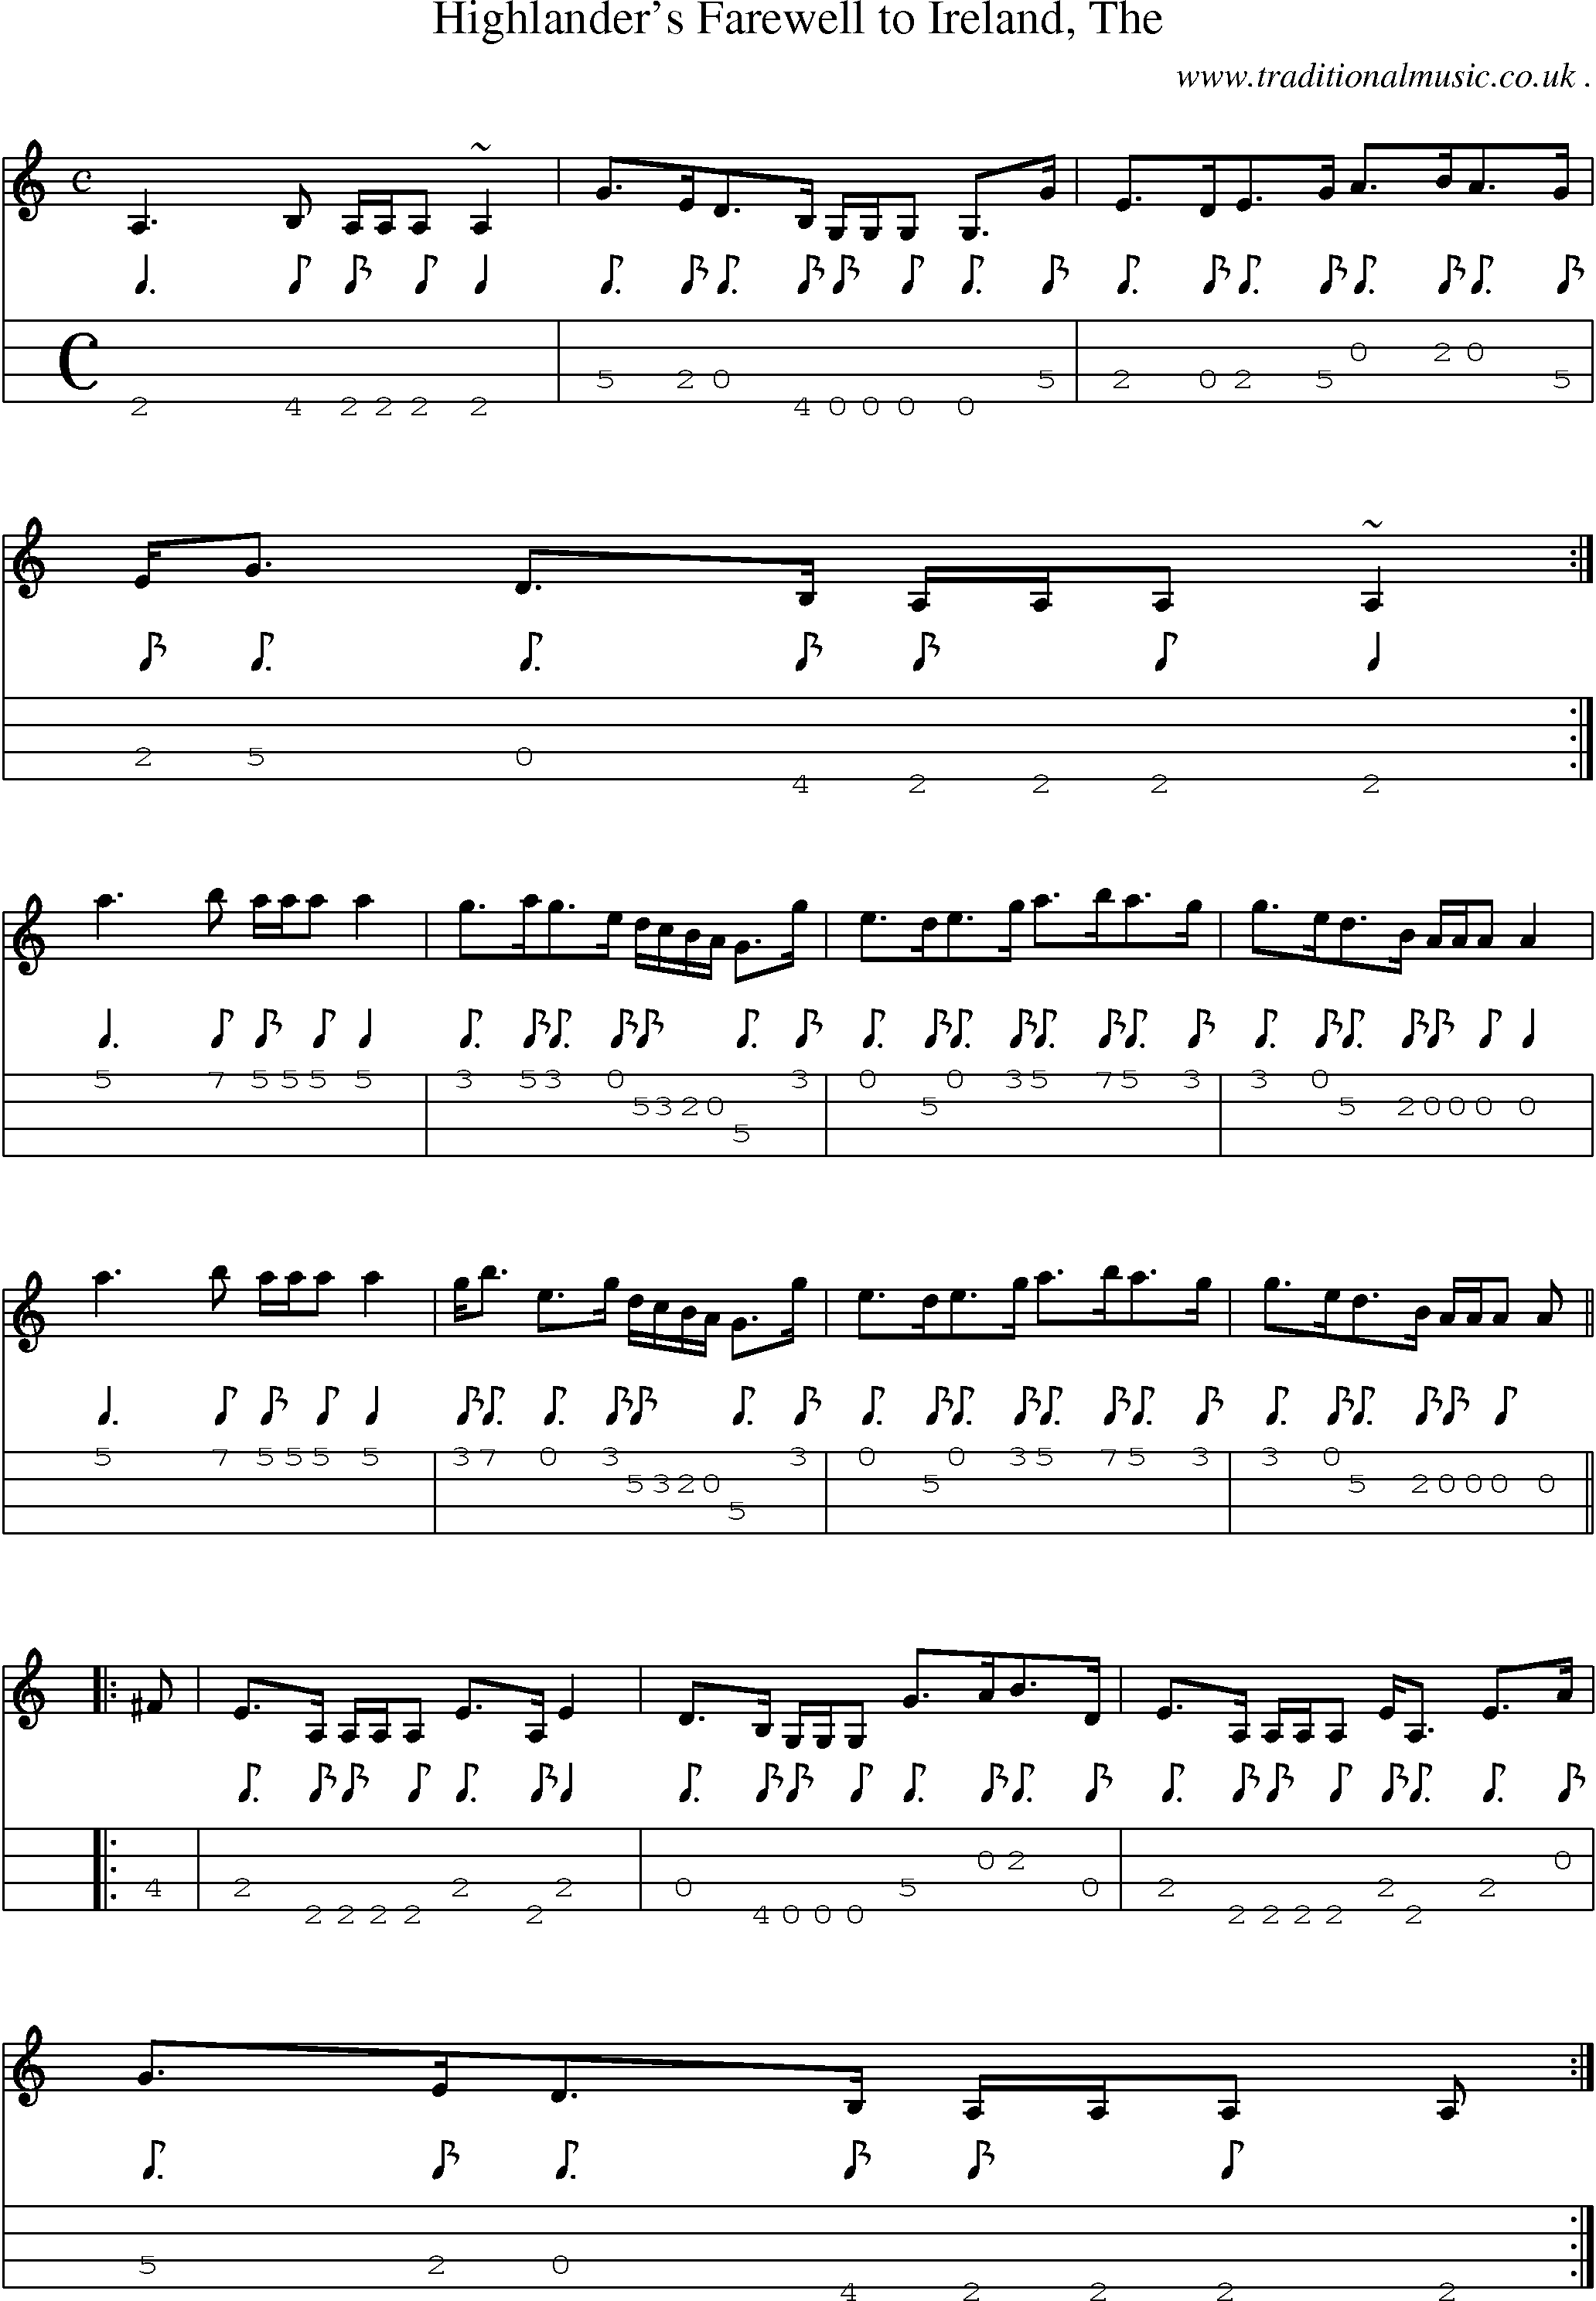 Sheet-music  score, Chords and Mandolin Tabs for Highlanders Farewell To Ireland1